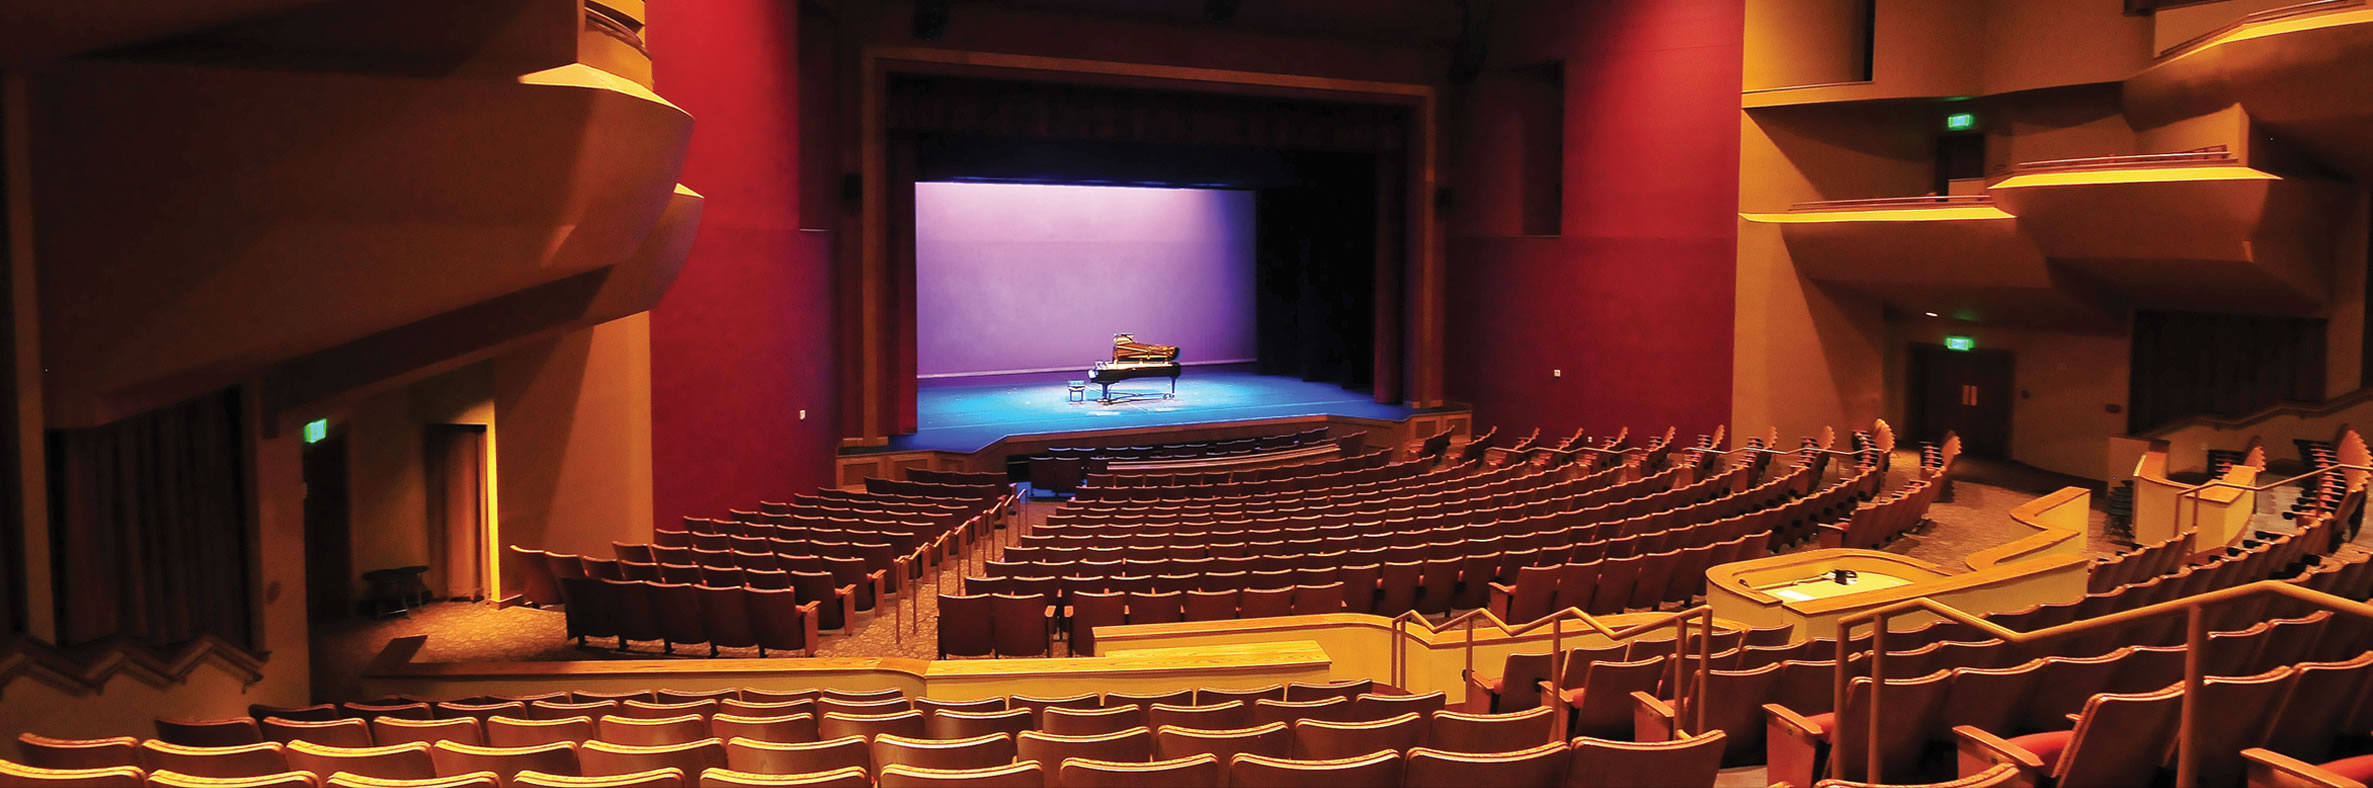 inside of Sharon: seating and stage